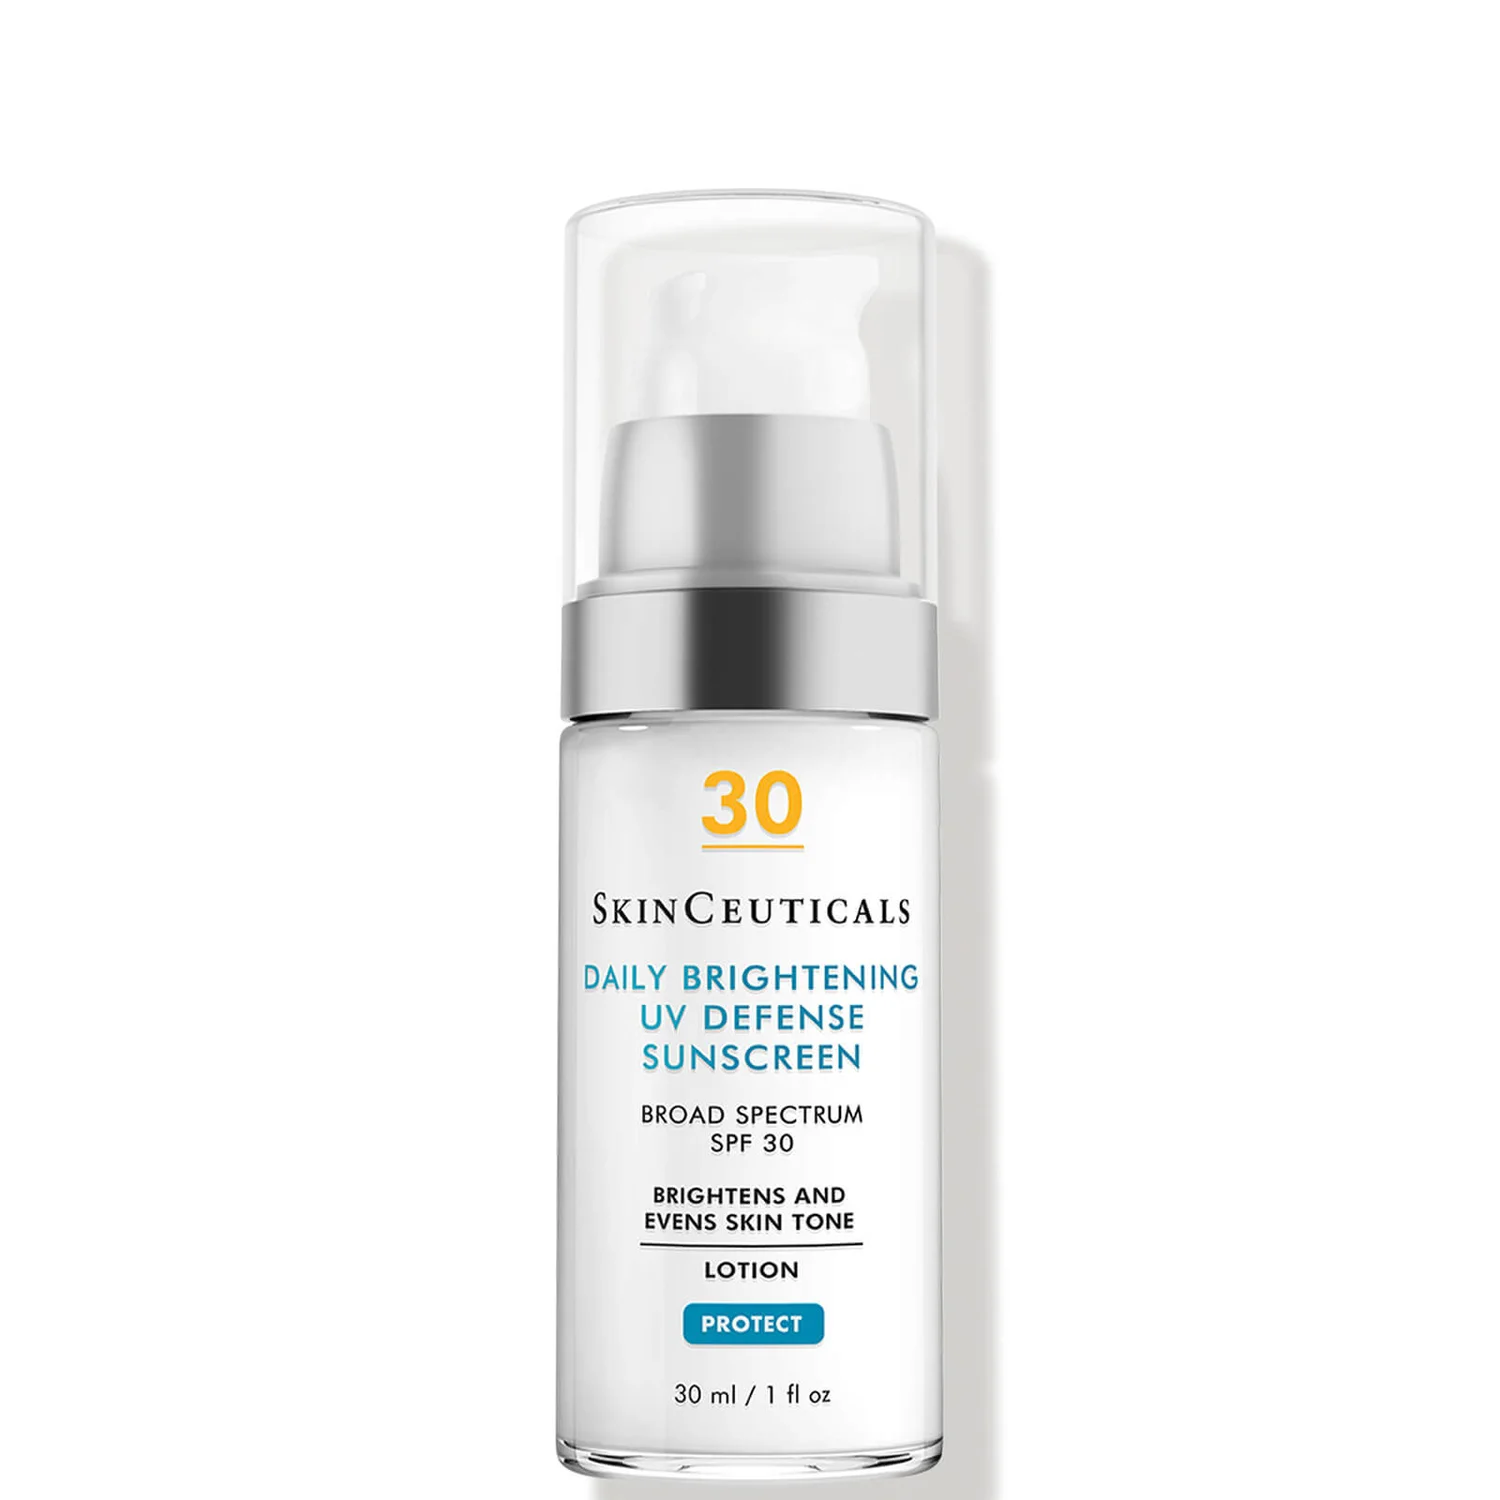 A white 30-ml pump bottle of the SkinCeuticals Daily Brightening UV Defense Broad Spectrum SPF 30. On the bottle, it says: 30, SKINCEUTICALS, DAILY BRIGHTENING UV DEFENSE SUNSCREEN, BROAD SPECTRUM, SPF 30, BRIGHTENS AND EVENS SKIN TONE, LOTION, PROTECT
